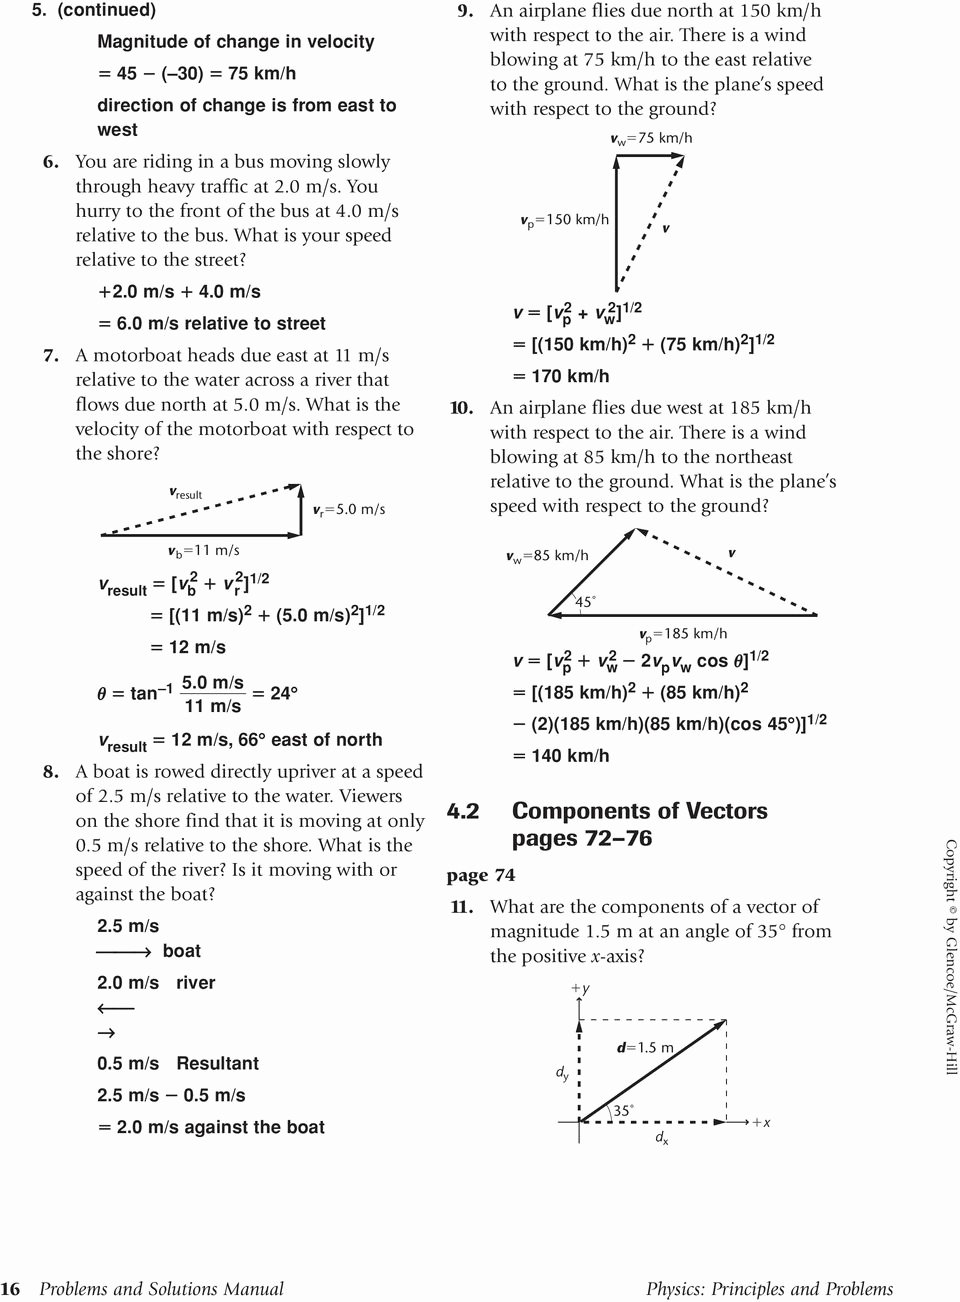 Operations with Scientific Notation Worksheet New Scientific Notation Worksheet Key Youtube Key Operations